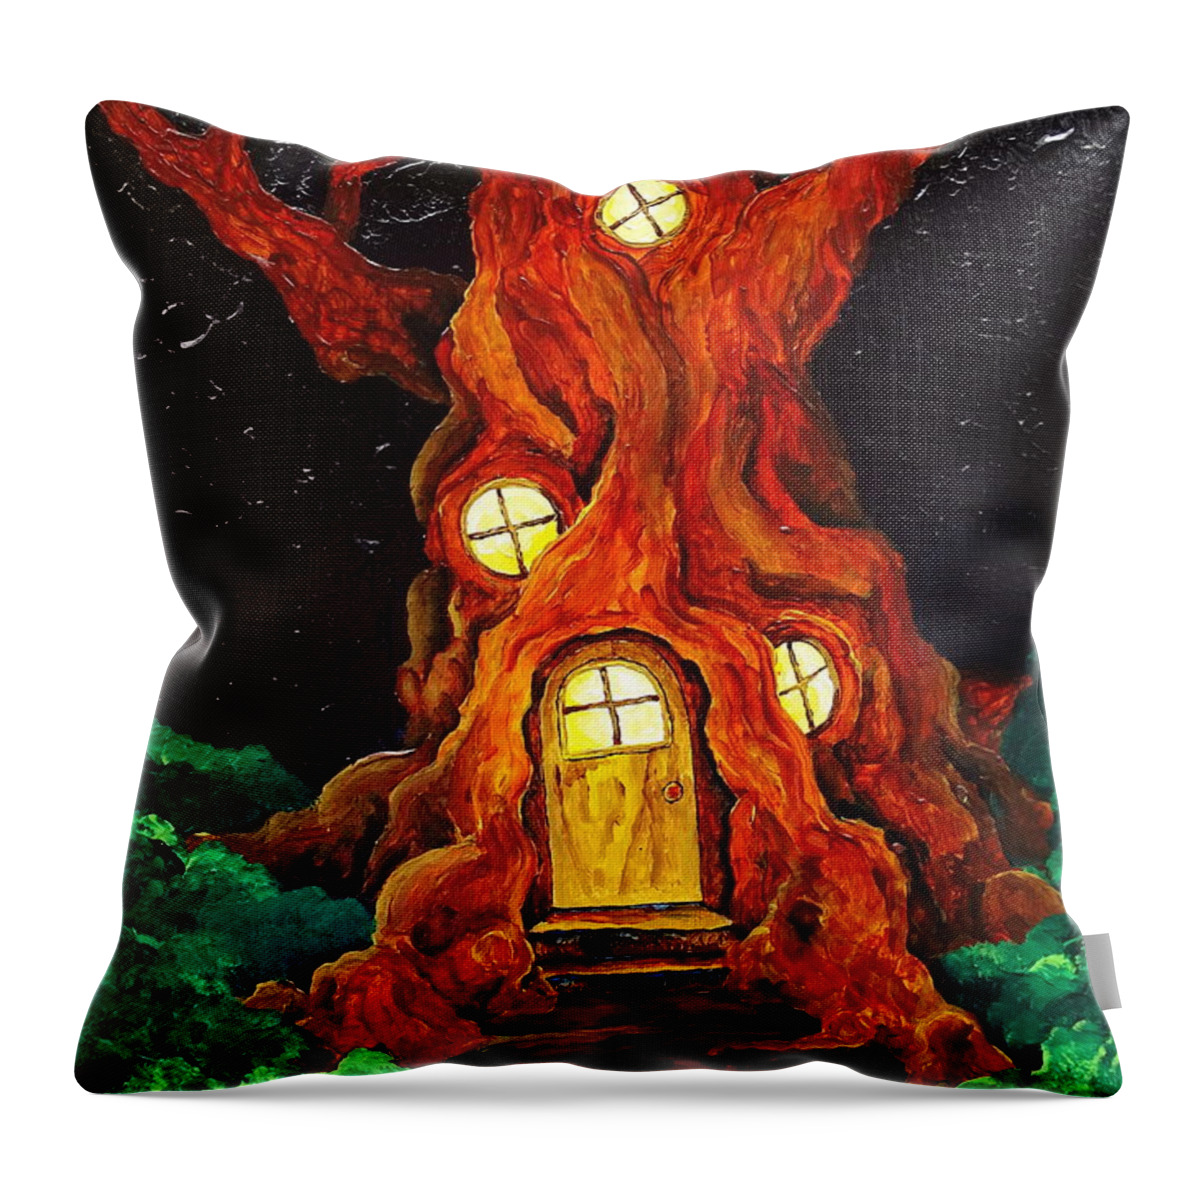 Magic Throw Pillow featuring the painting Hobbit Home by Teresamarie Yawn